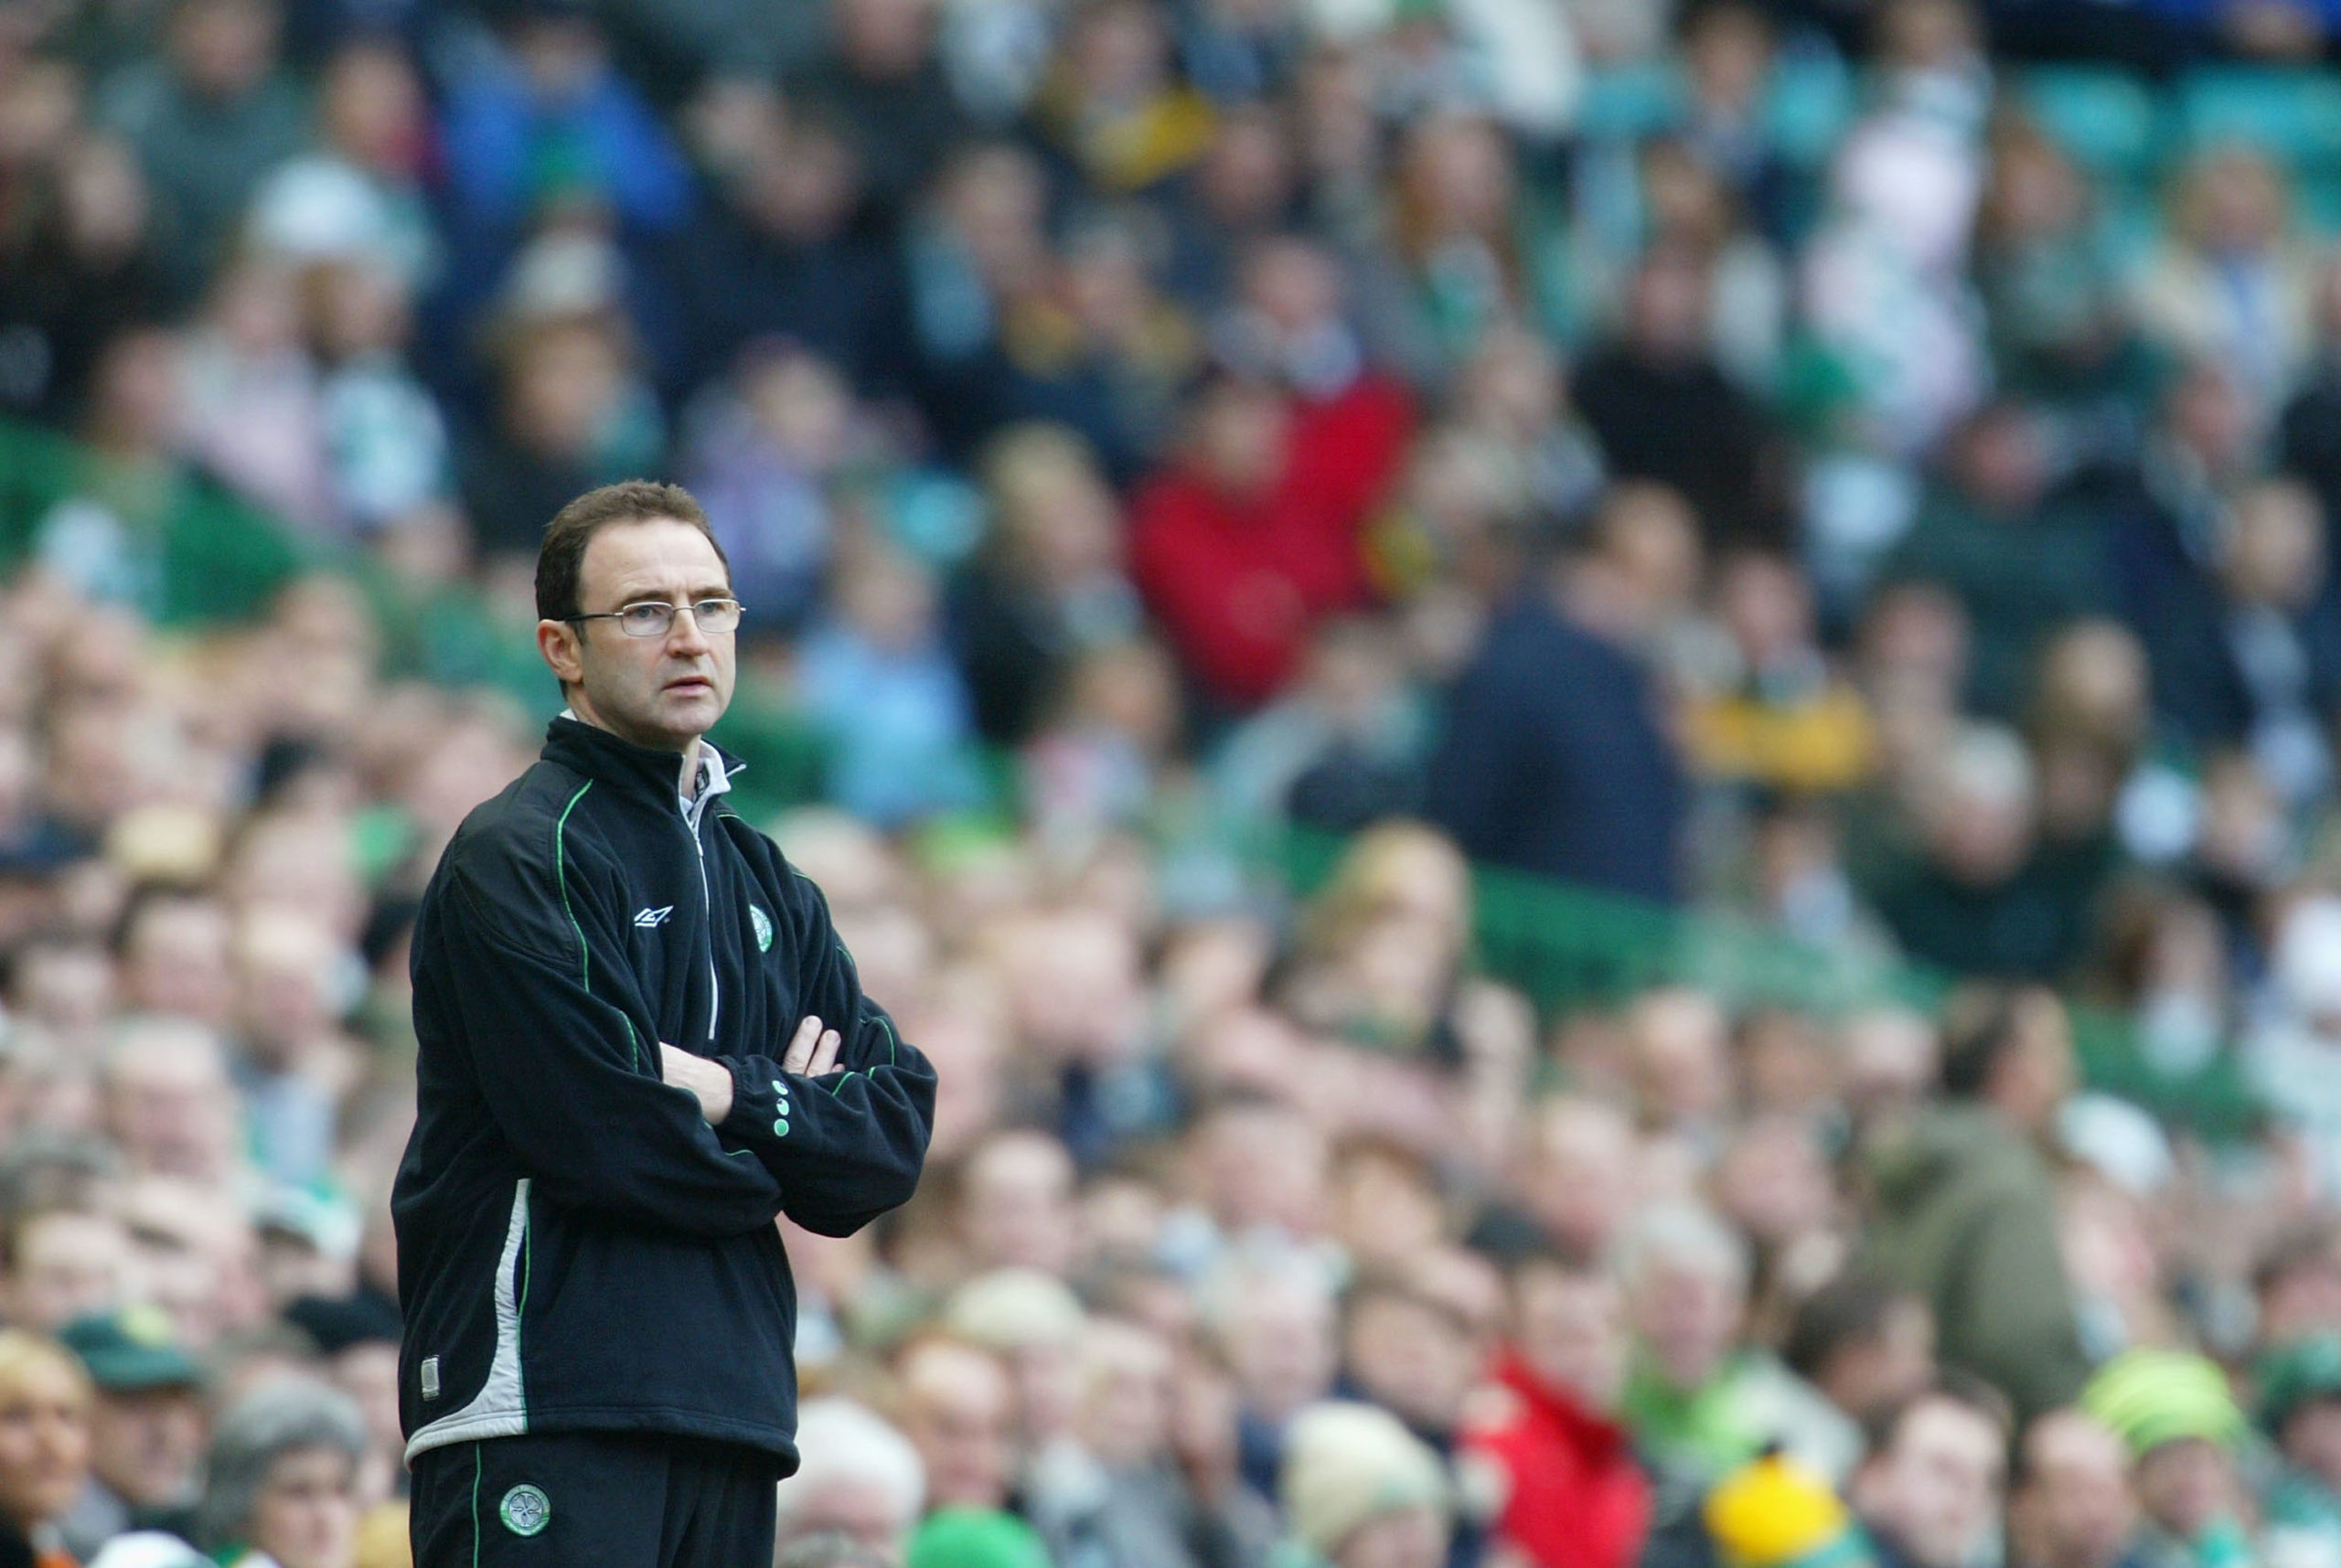 Celtic legend Martin O'Neill not ready to walk away from game just yet